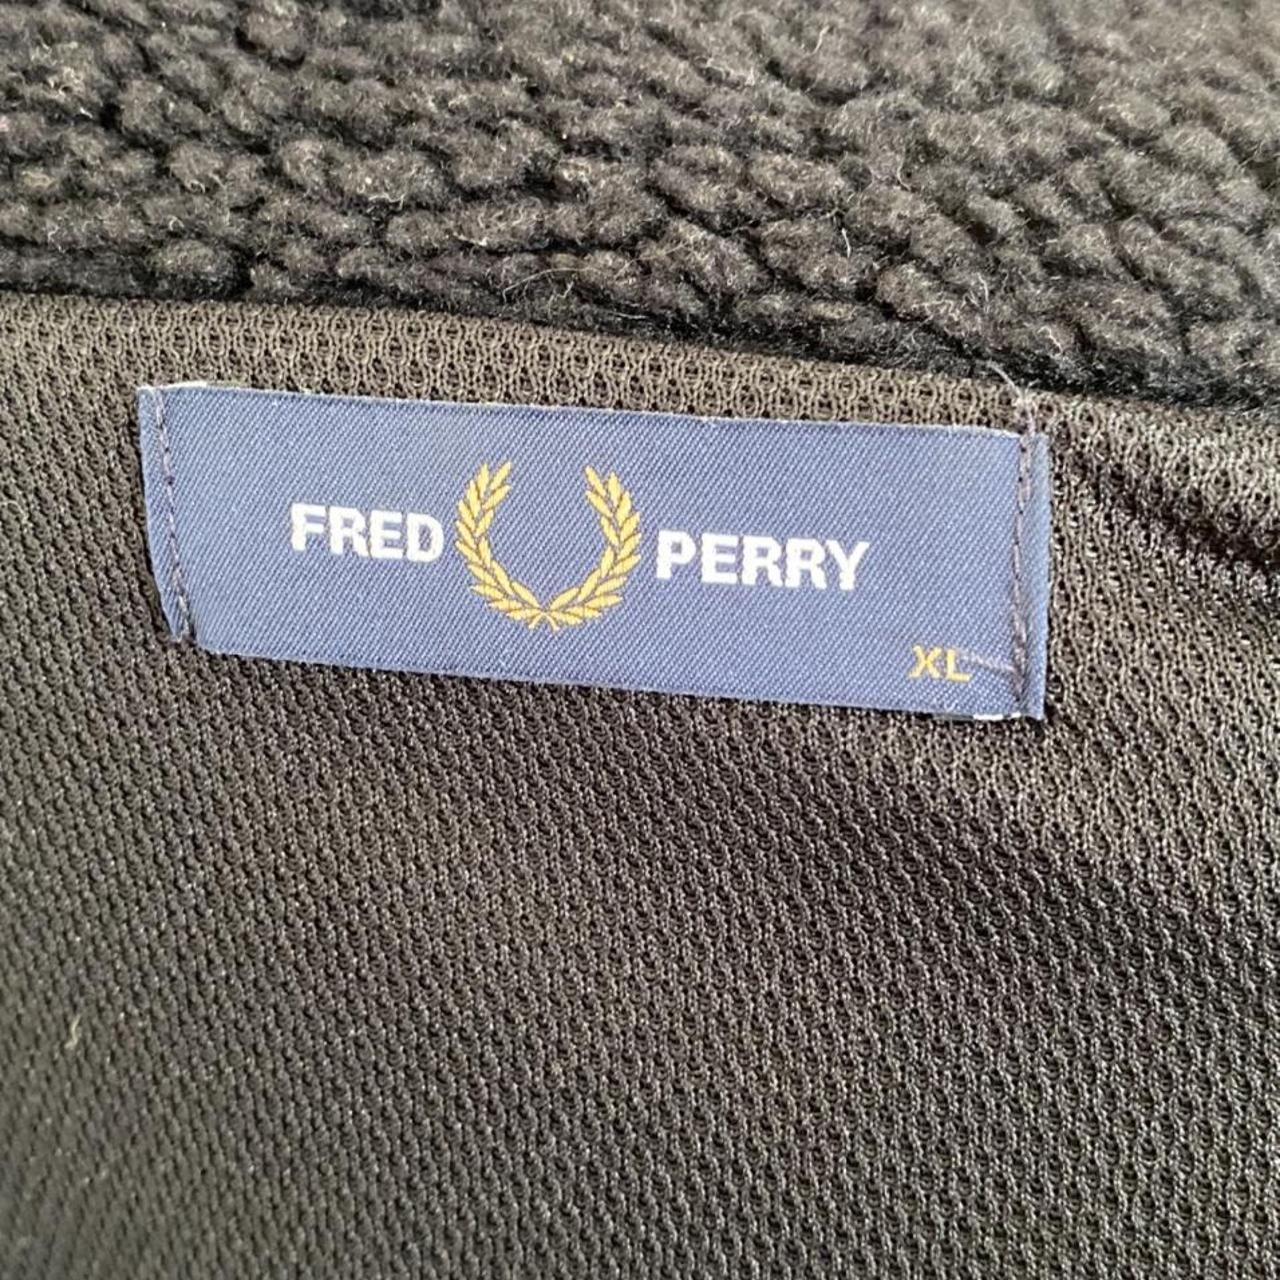 Fred Perry black fleece. Barely worn and in perfect... - Depop